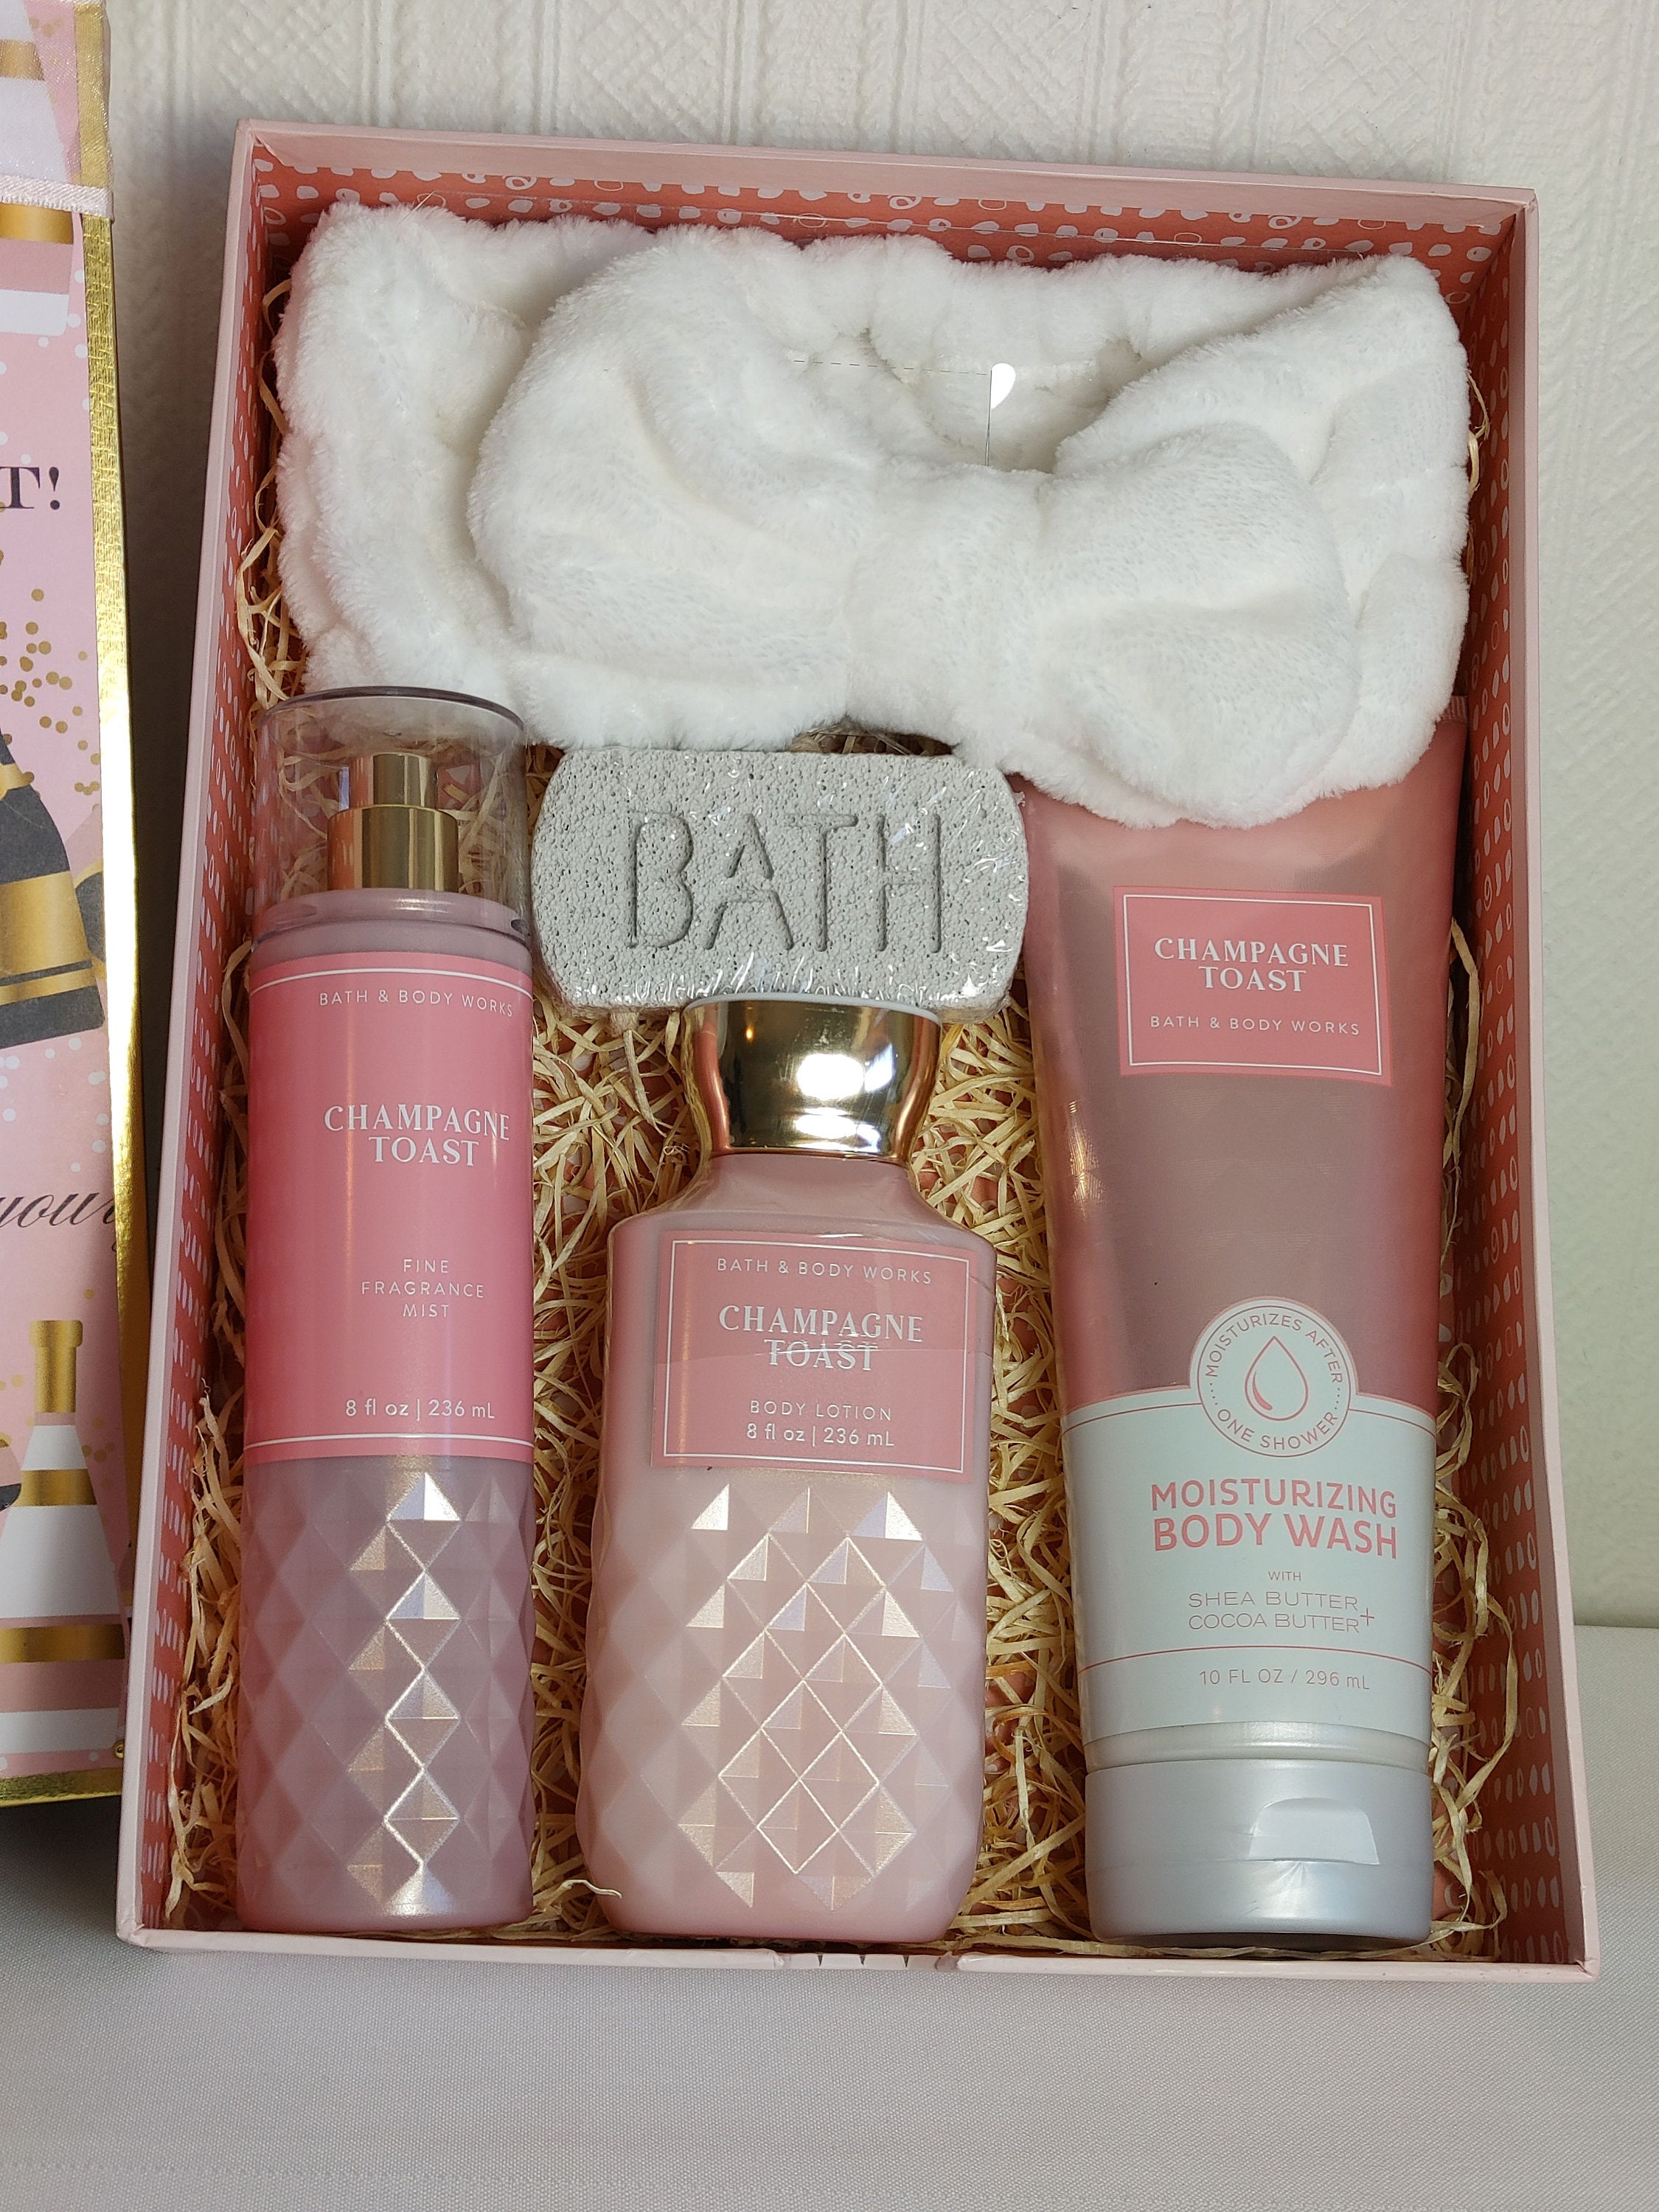 Bath and Body Works Champagne Toast Mini Gift Box Set Travel Size Shower Gel - Ultimate Hydration Body Cream and Fine Fragrance Mist in A Decorative